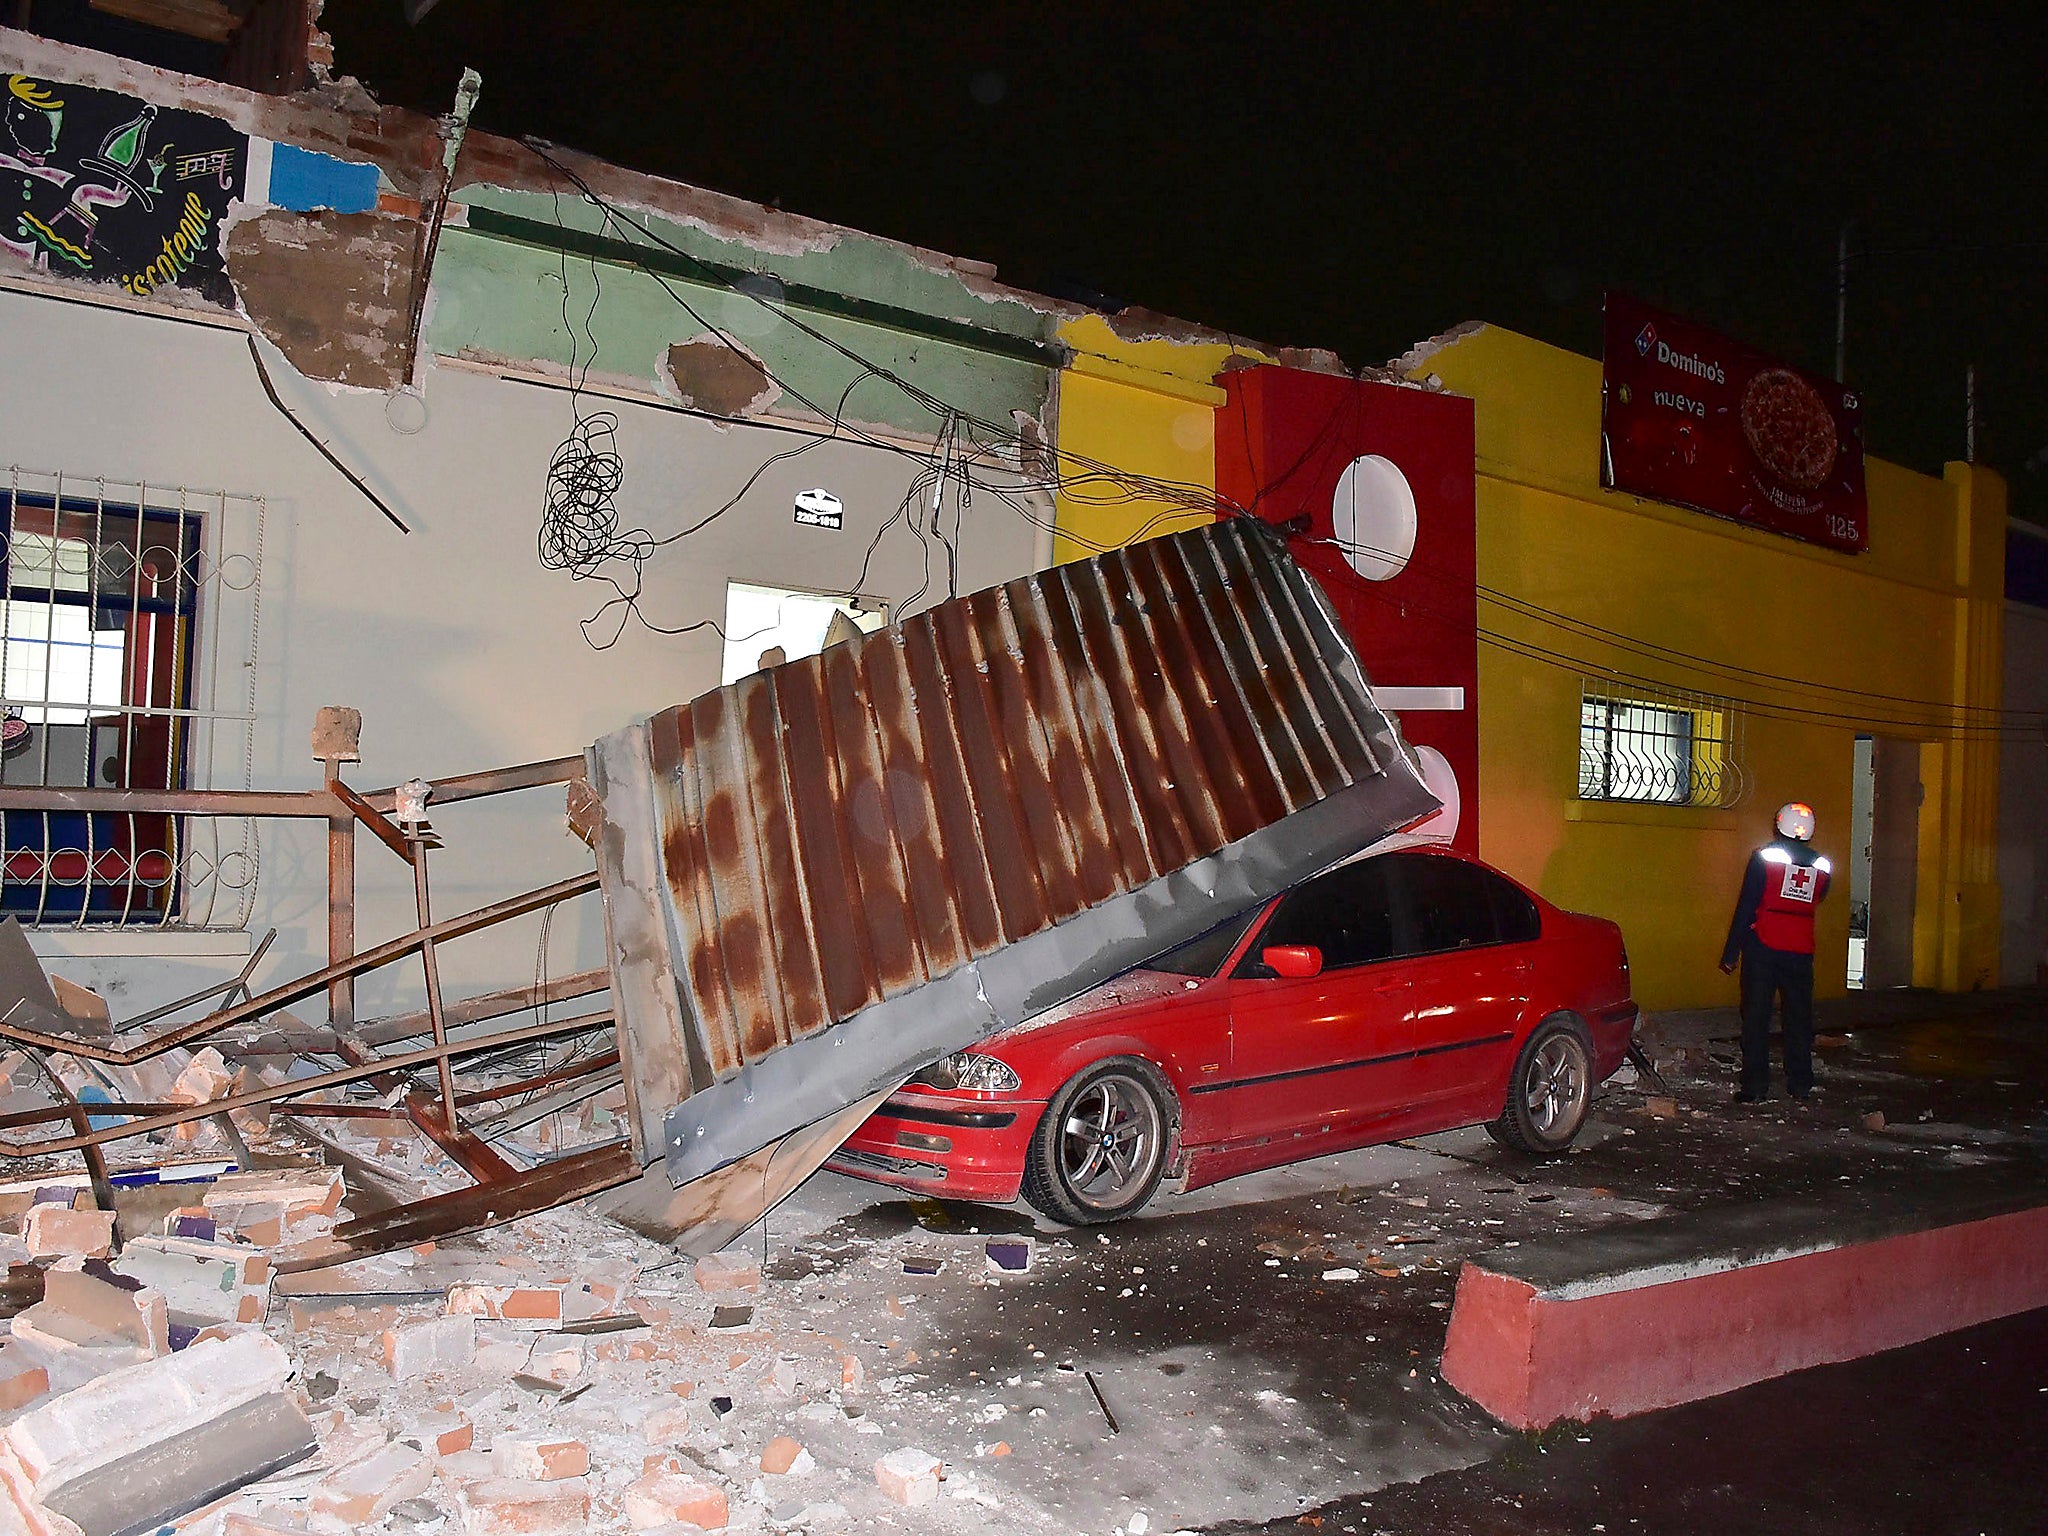 The earthquake caused damage in the Guatemalan village of Quetzaltenango